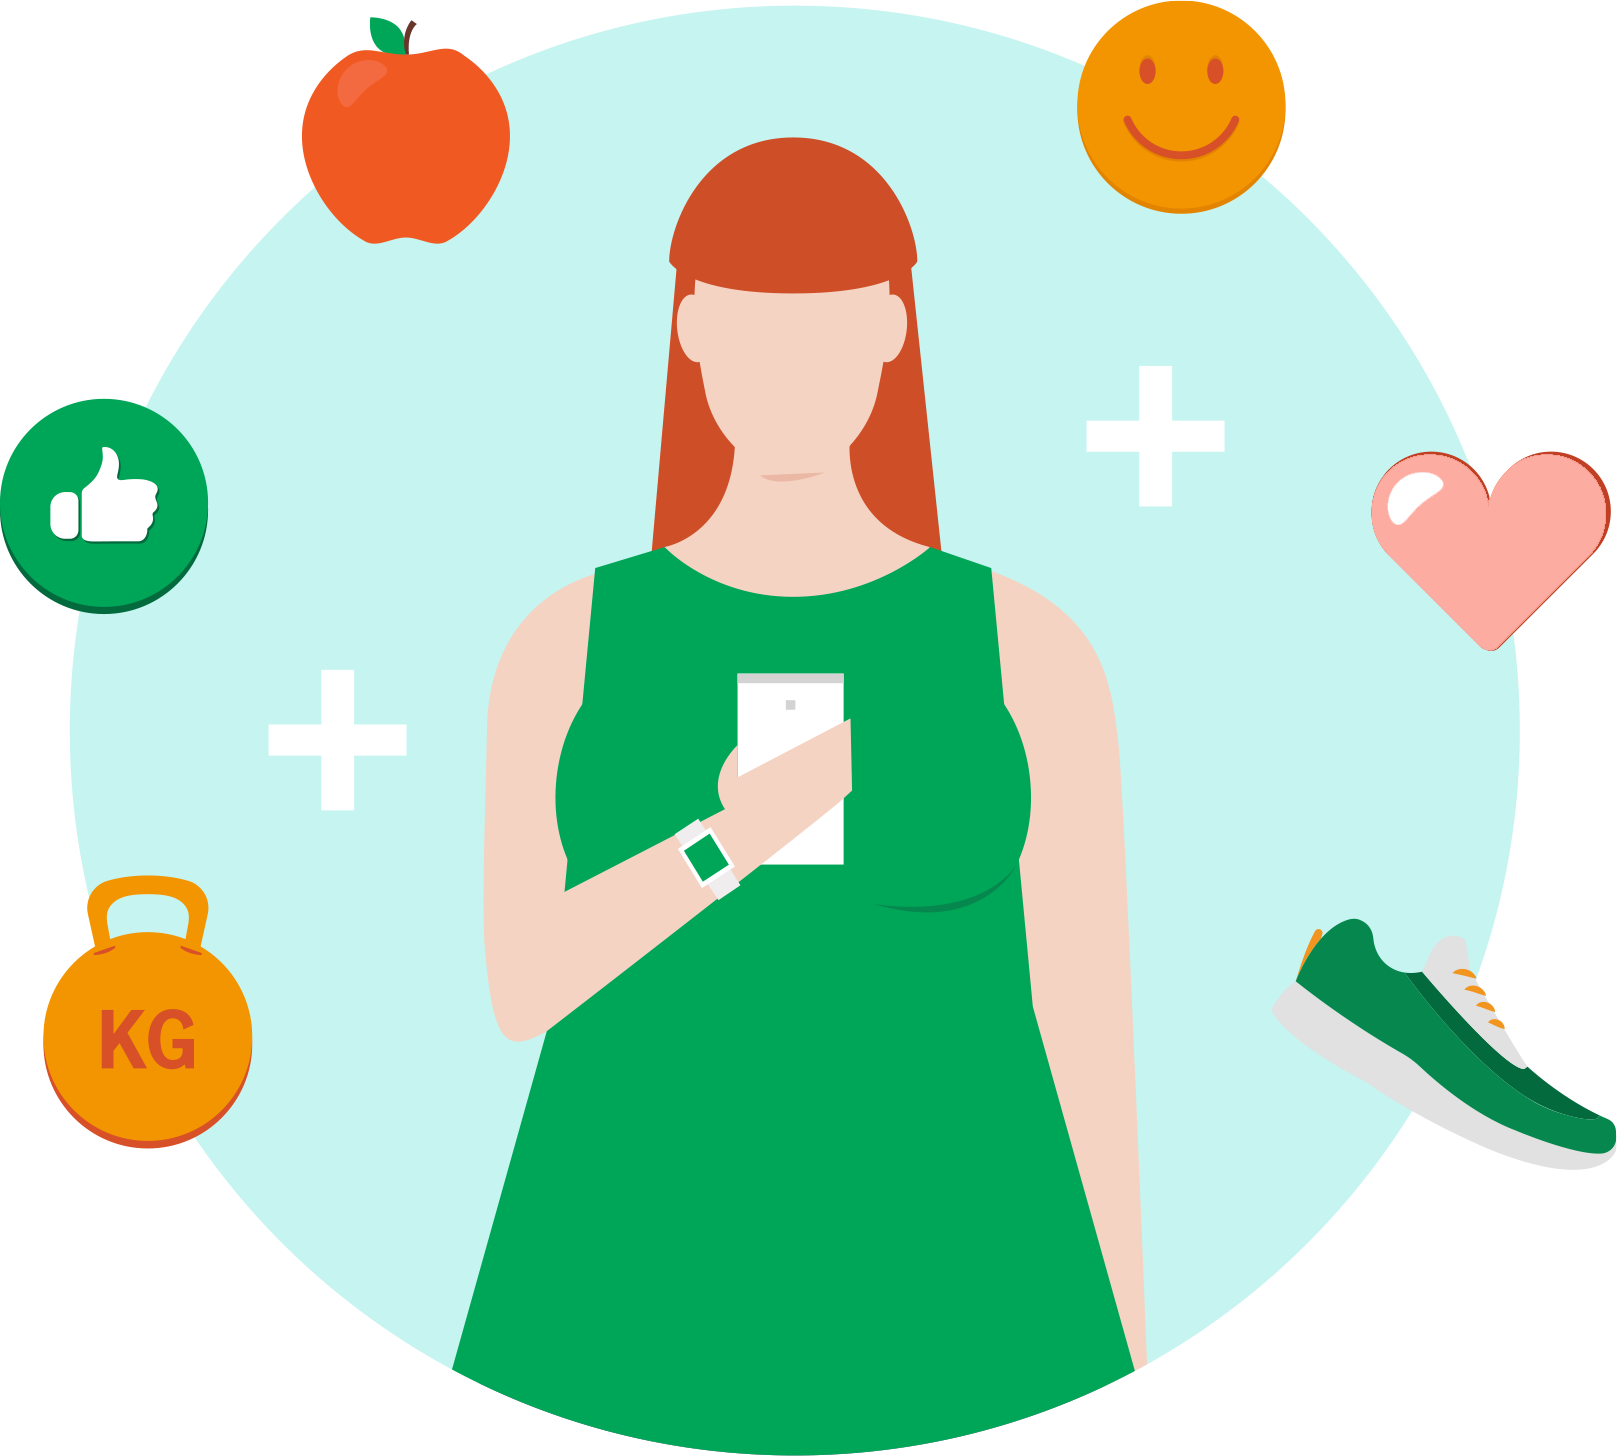 Graphic of person holding a mobile phone and surrounded by icons of a weight, thumbs up, apple, smiley face emoji, heart, and sneakers